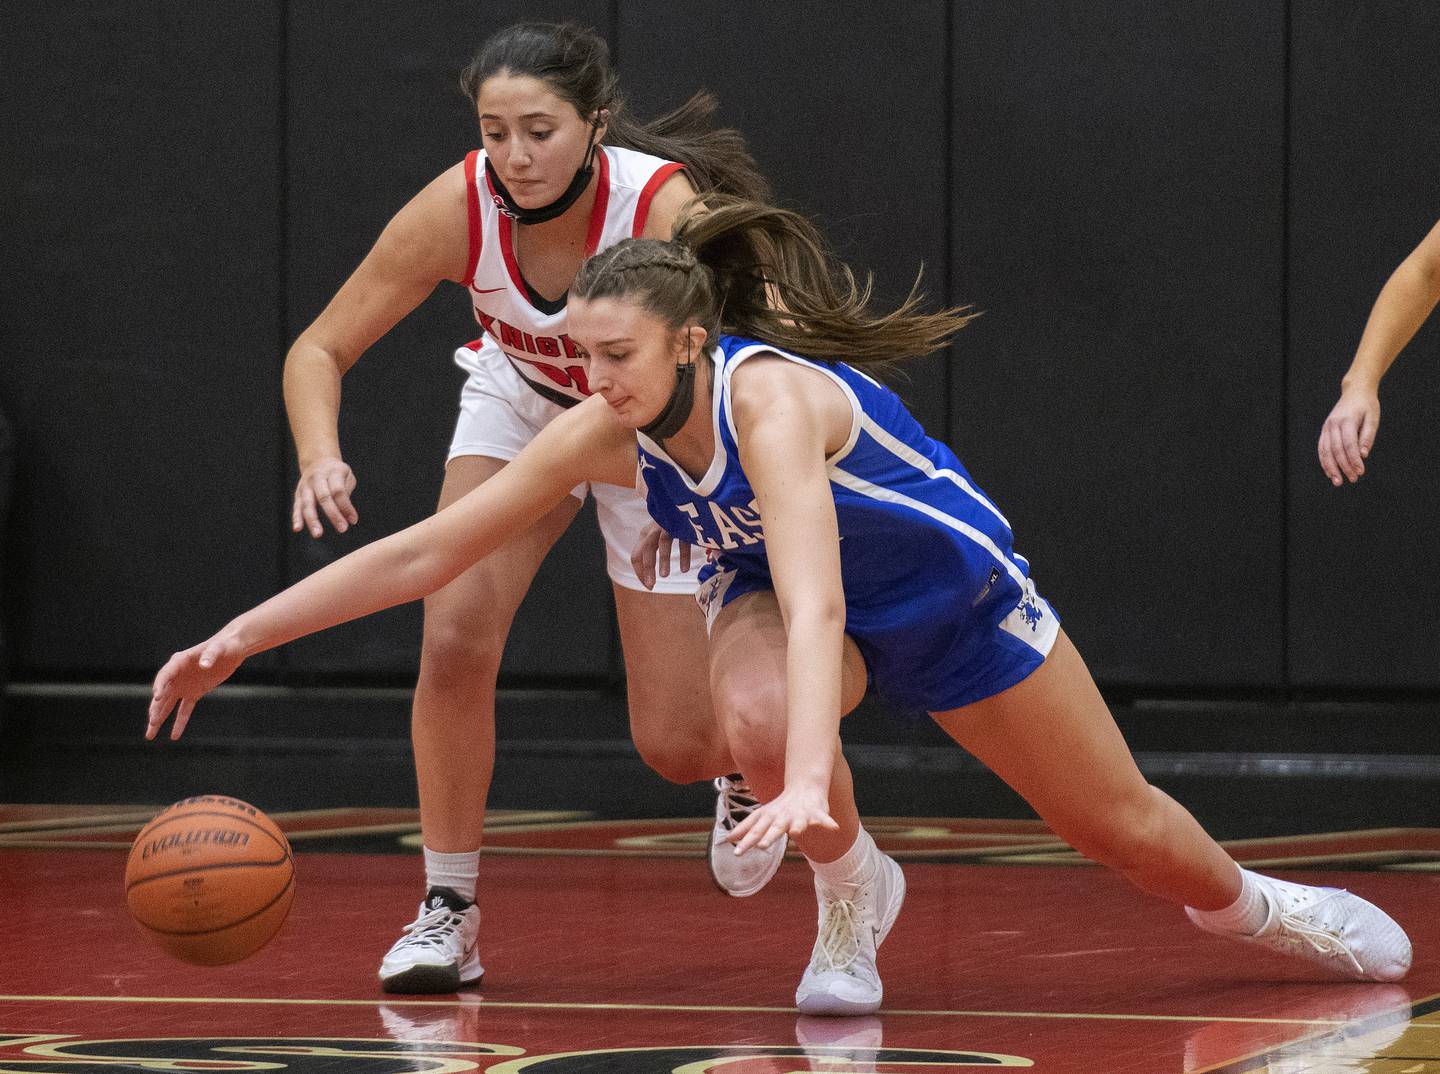 Lincoln-Way East's Hayven Smith lunges for a loose ball in front of Lincoln-Way Central's Angelina Panos during a game on Tuesday, Dec. 7, 2021.